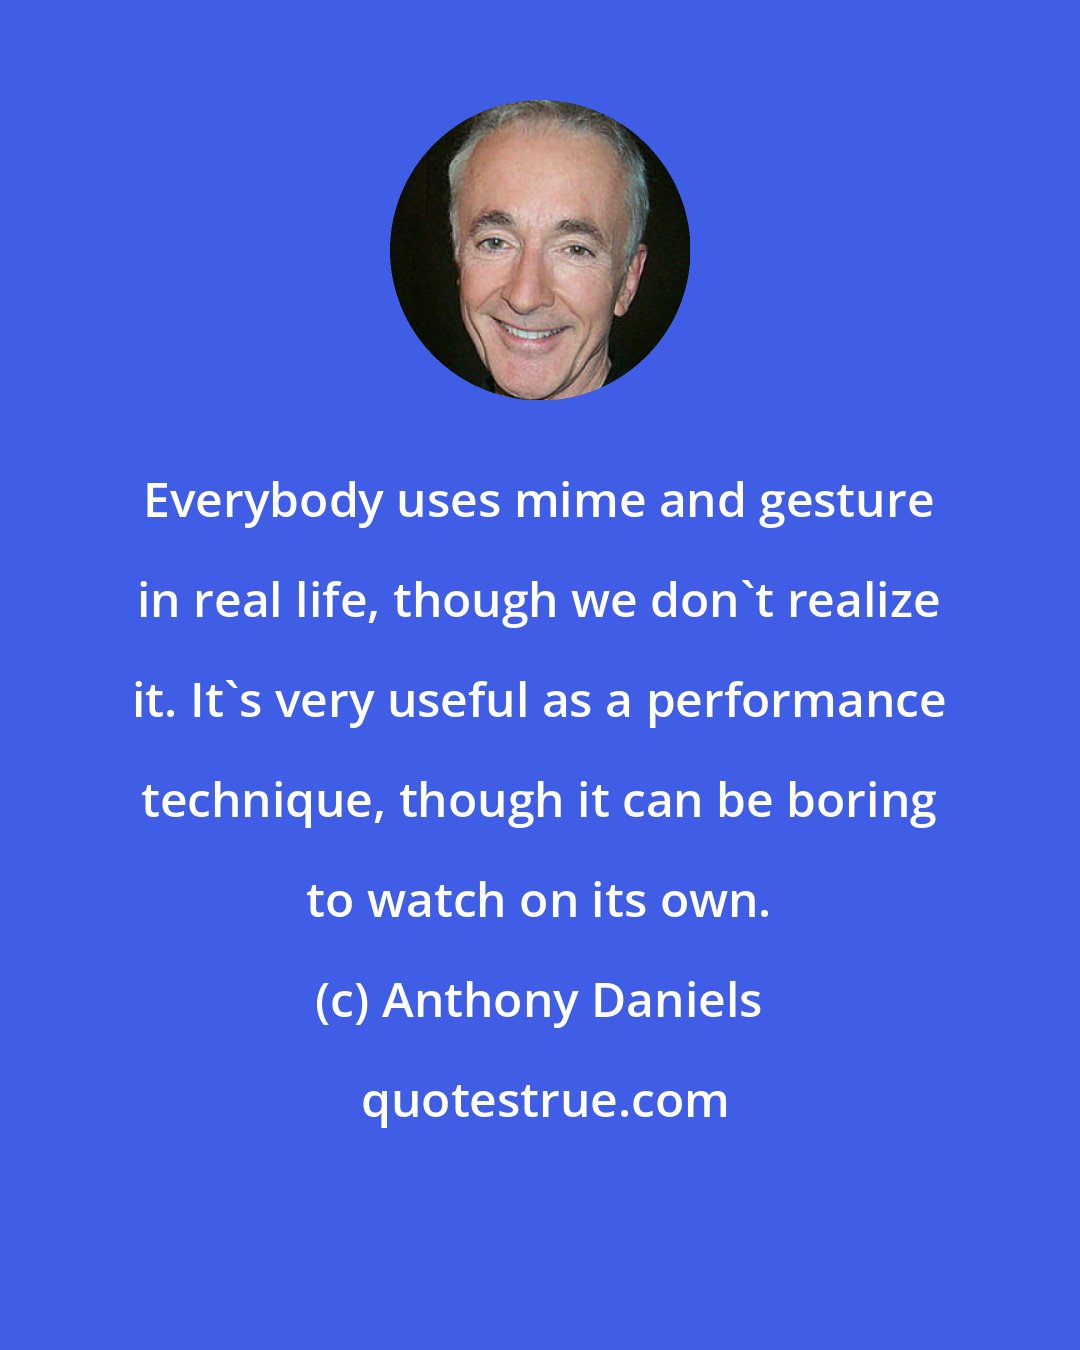 Anthony Daniels: Everybody uses mime and gesture in real life, though we don't realize it. It's very useful as a performance technique, though it can be boring to watch on its own.